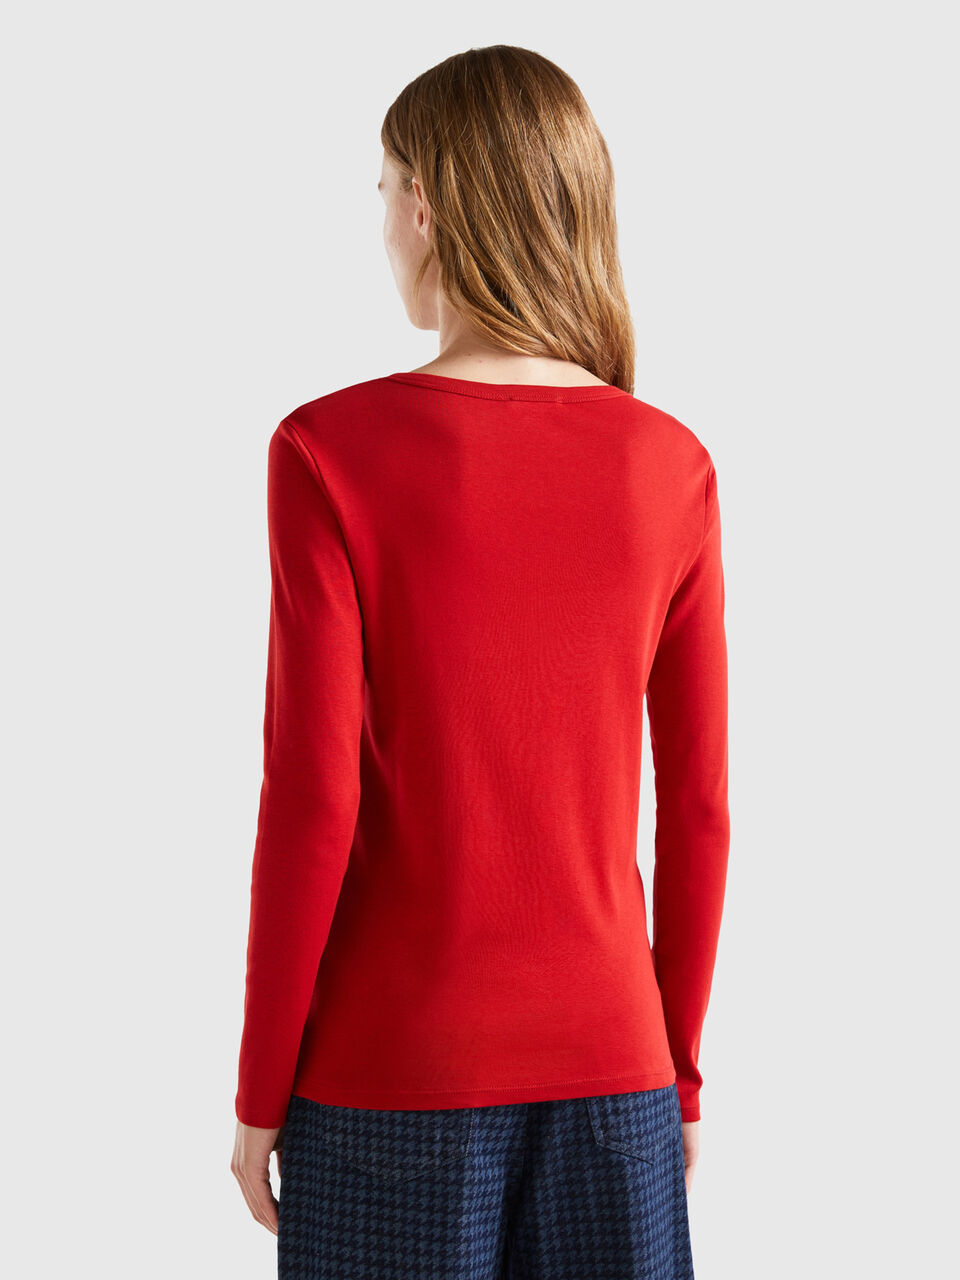 Long sleeve red t-shirt | Benetton Red 